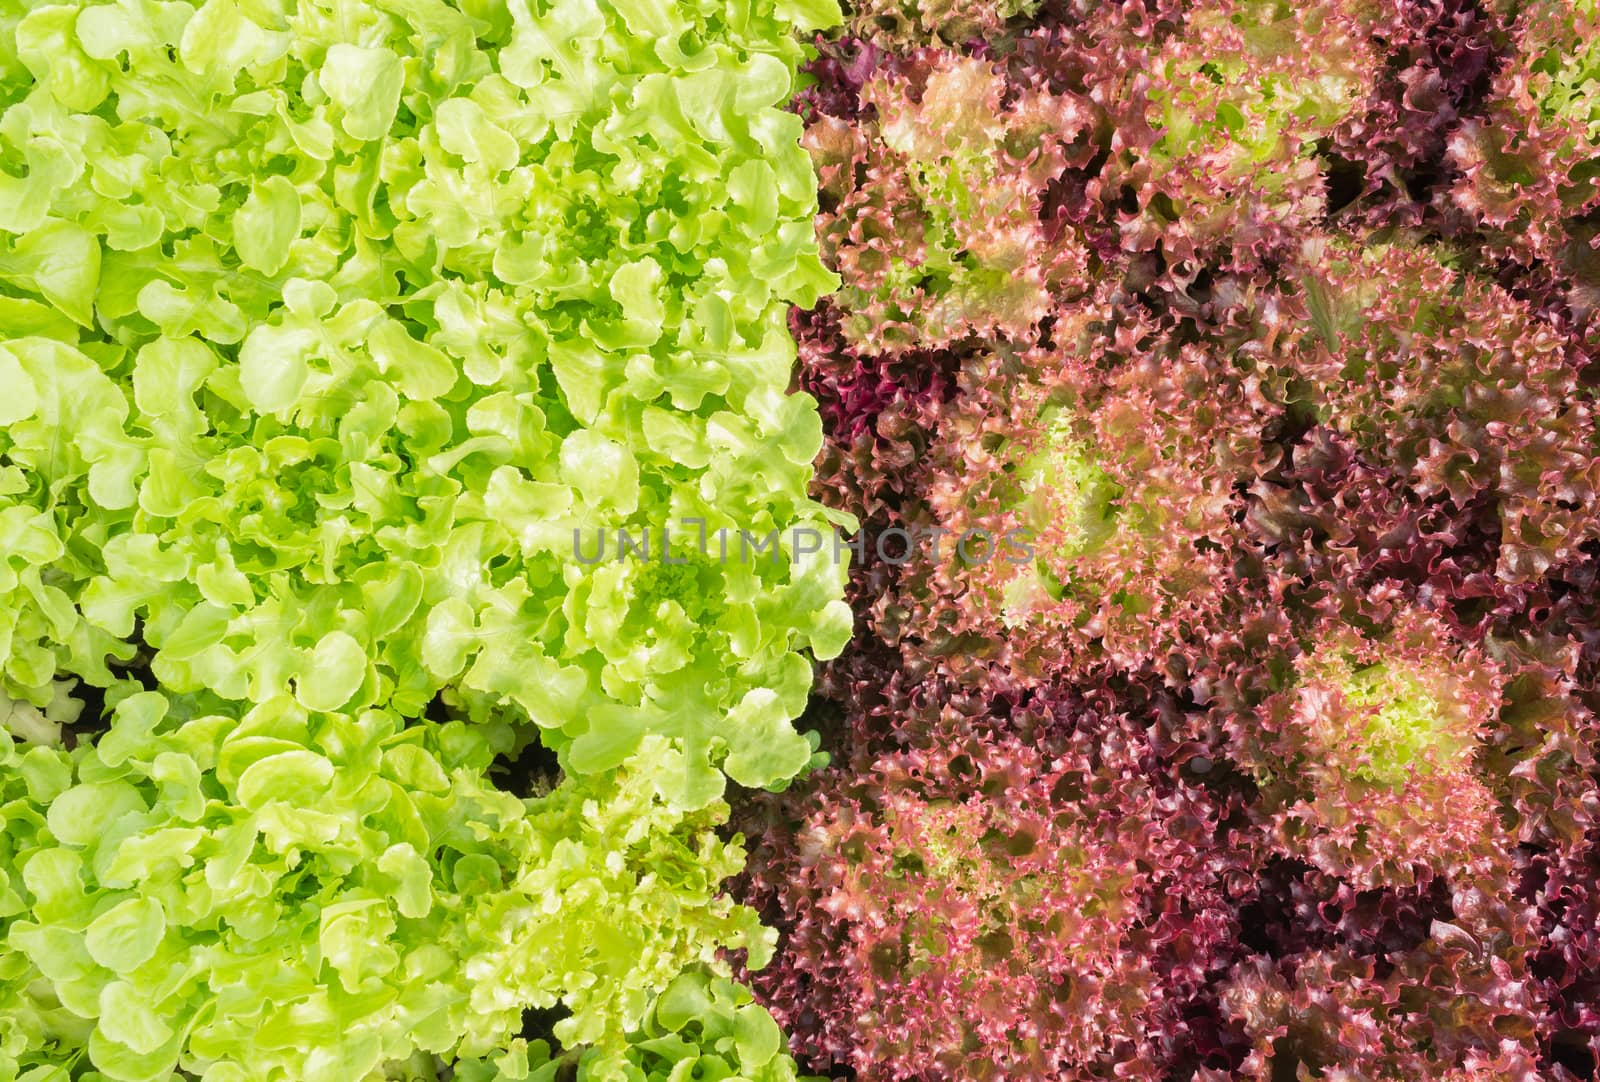 Red Leaf Lettuce or Red Coral and Green Oak Lettuce for Diet Hea by steafpong